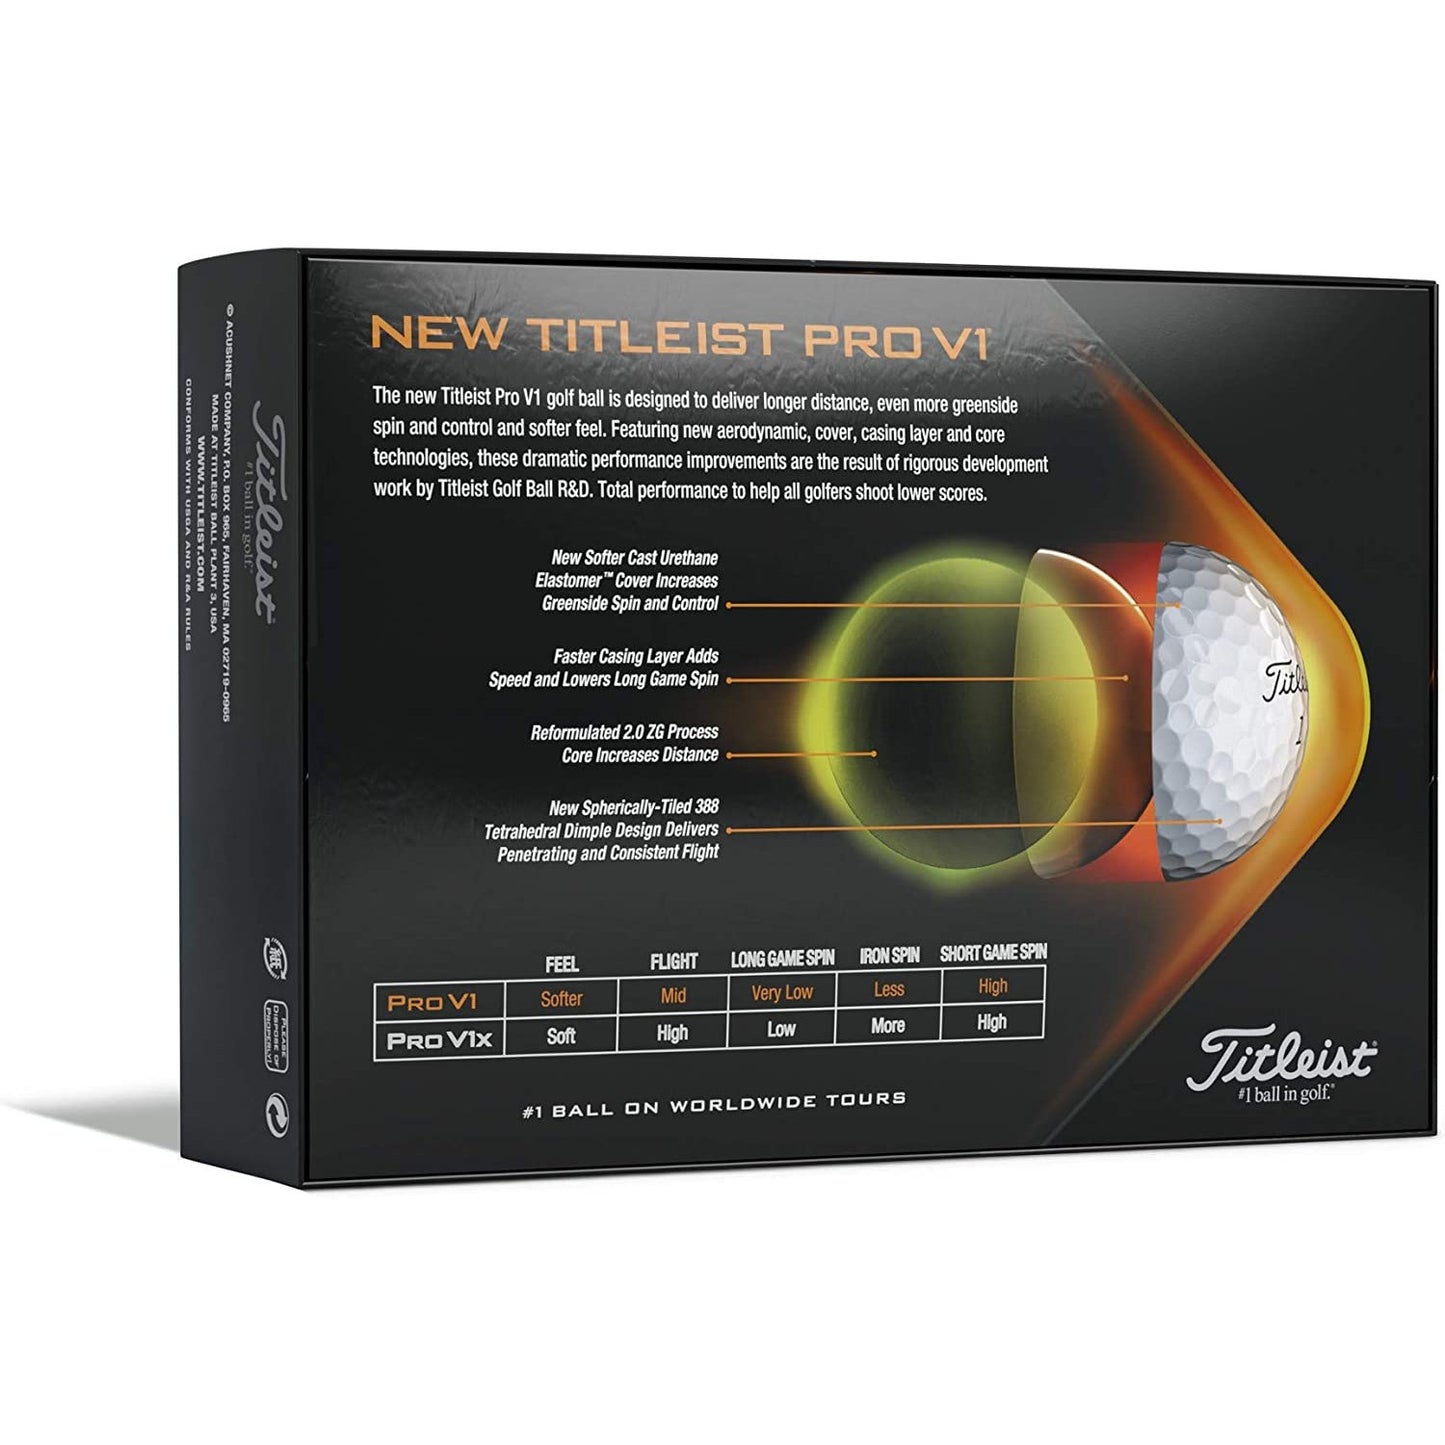 The back of a box for custom personalized golf balls by Titleist.